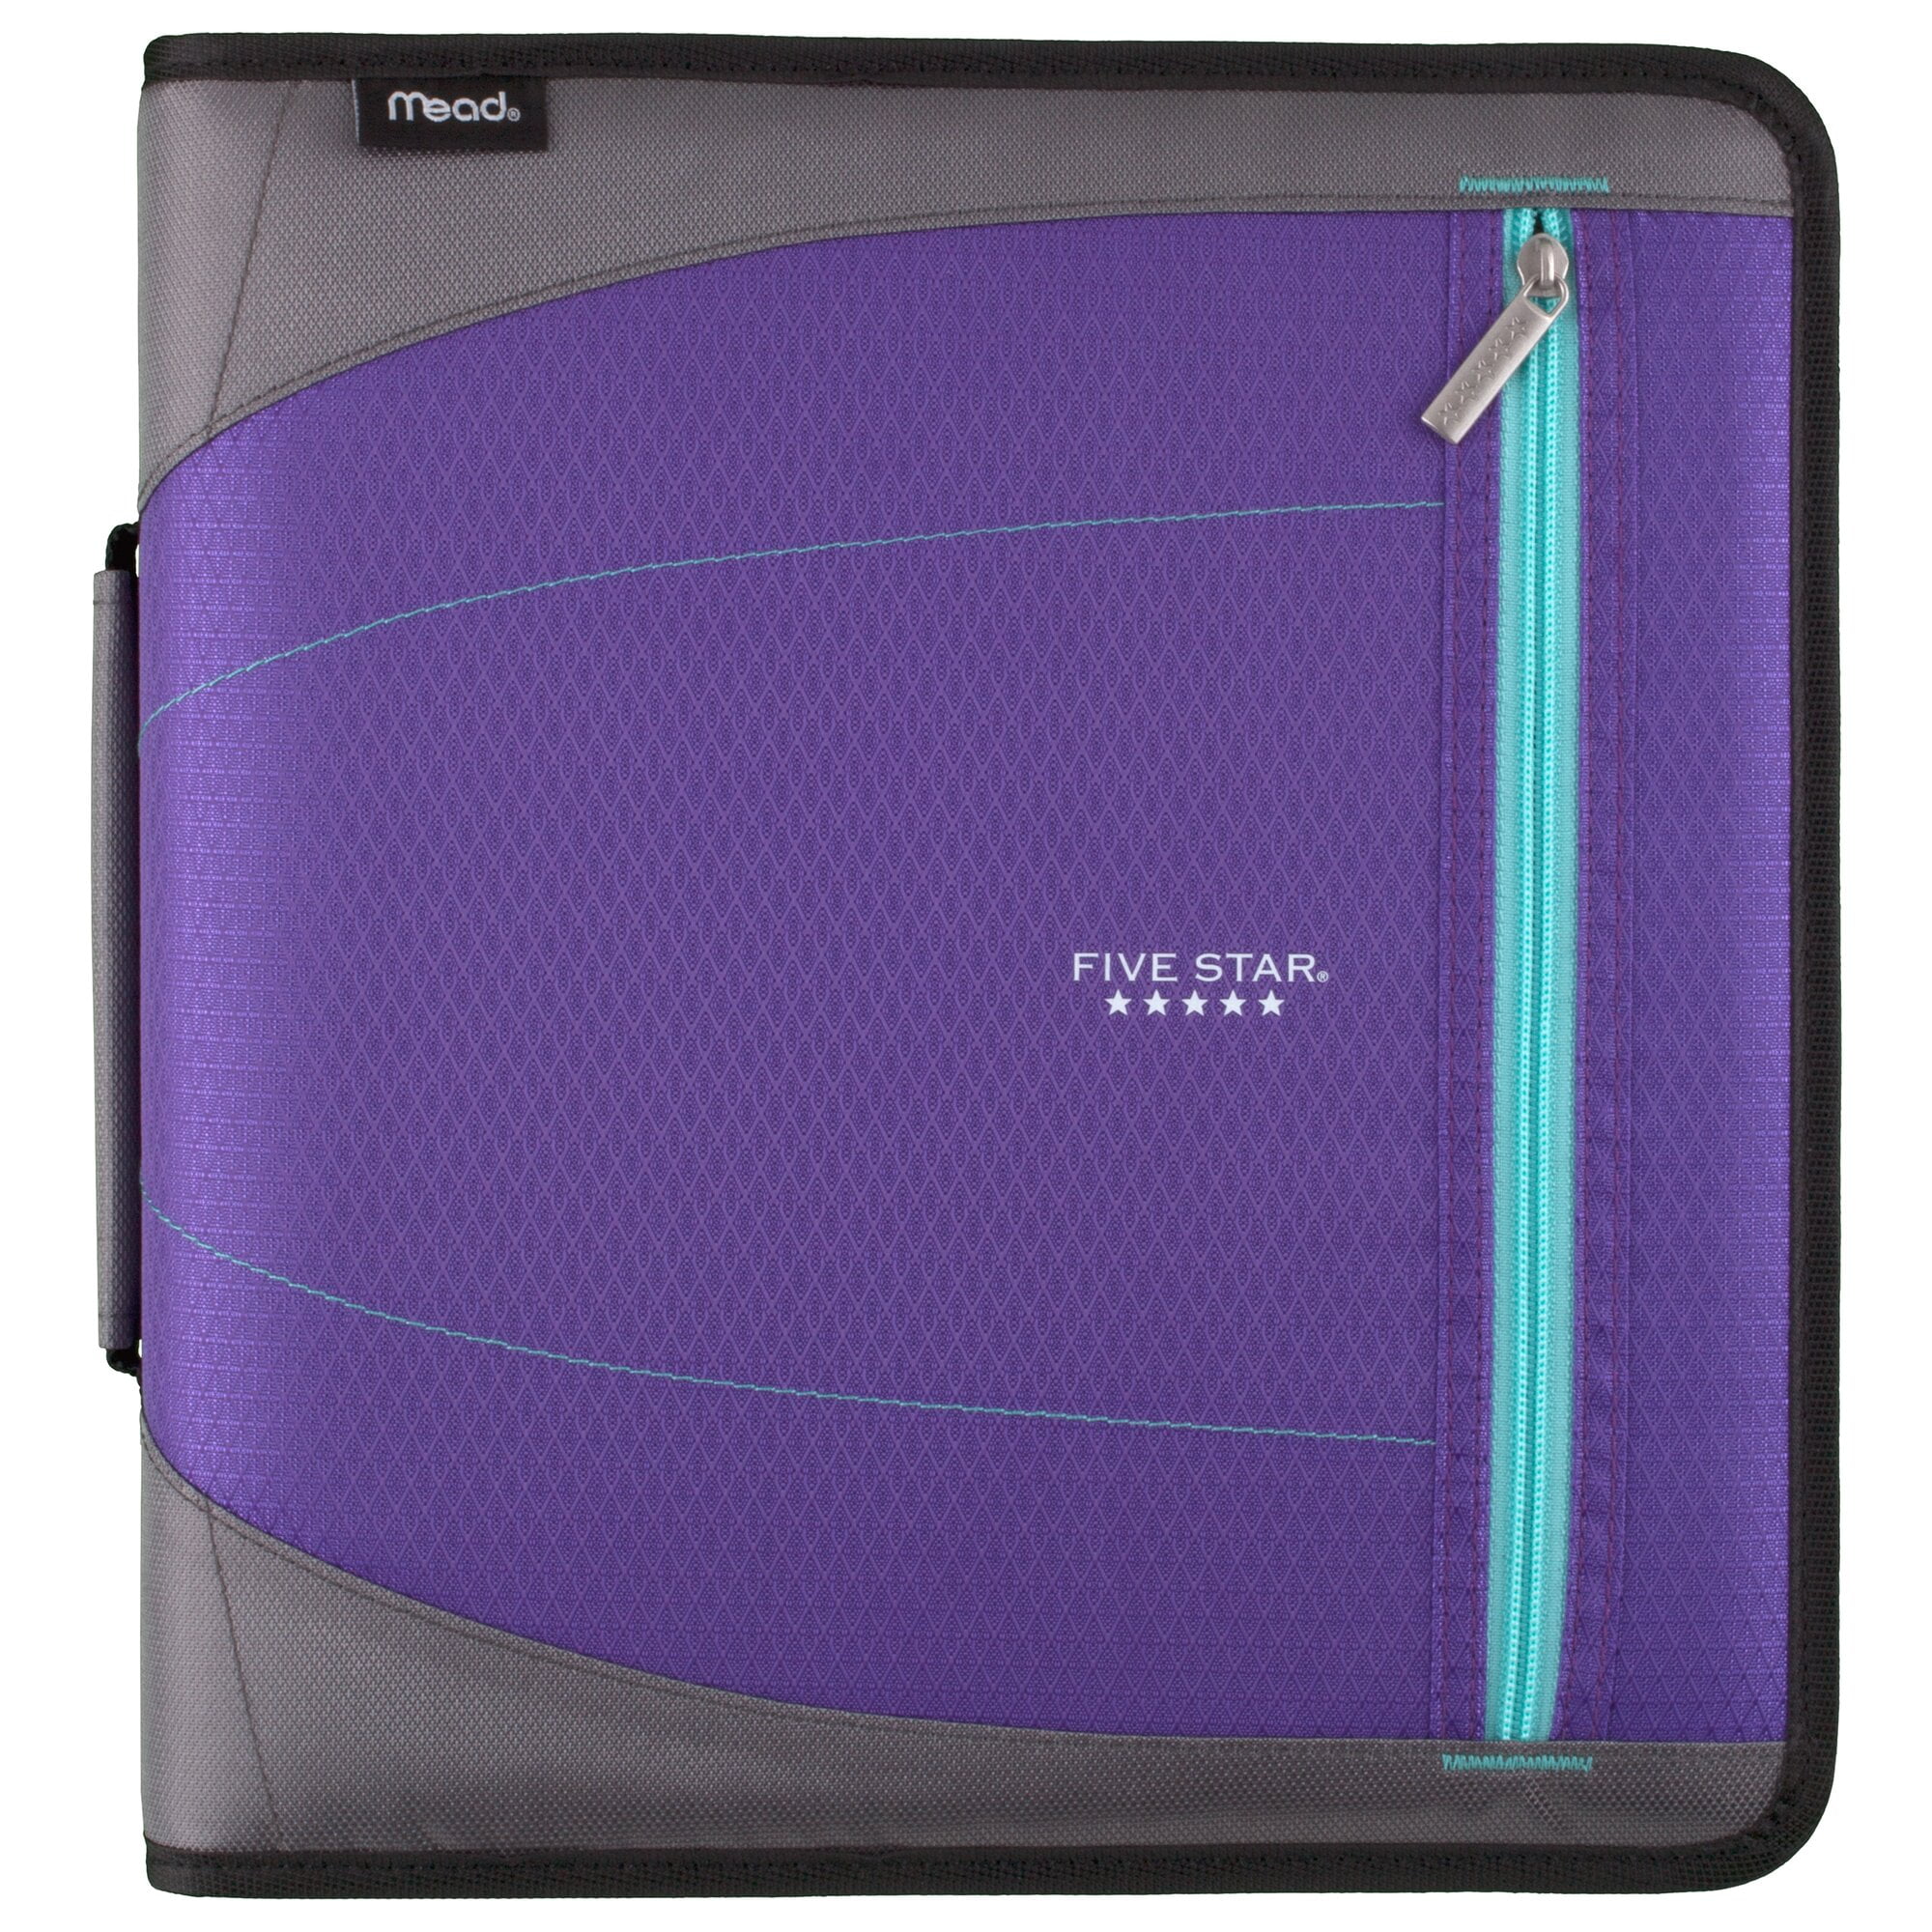 Five Star 2 in Zipper Binder w/ Handle 530 Sheet Capacity 4 Colors available New 